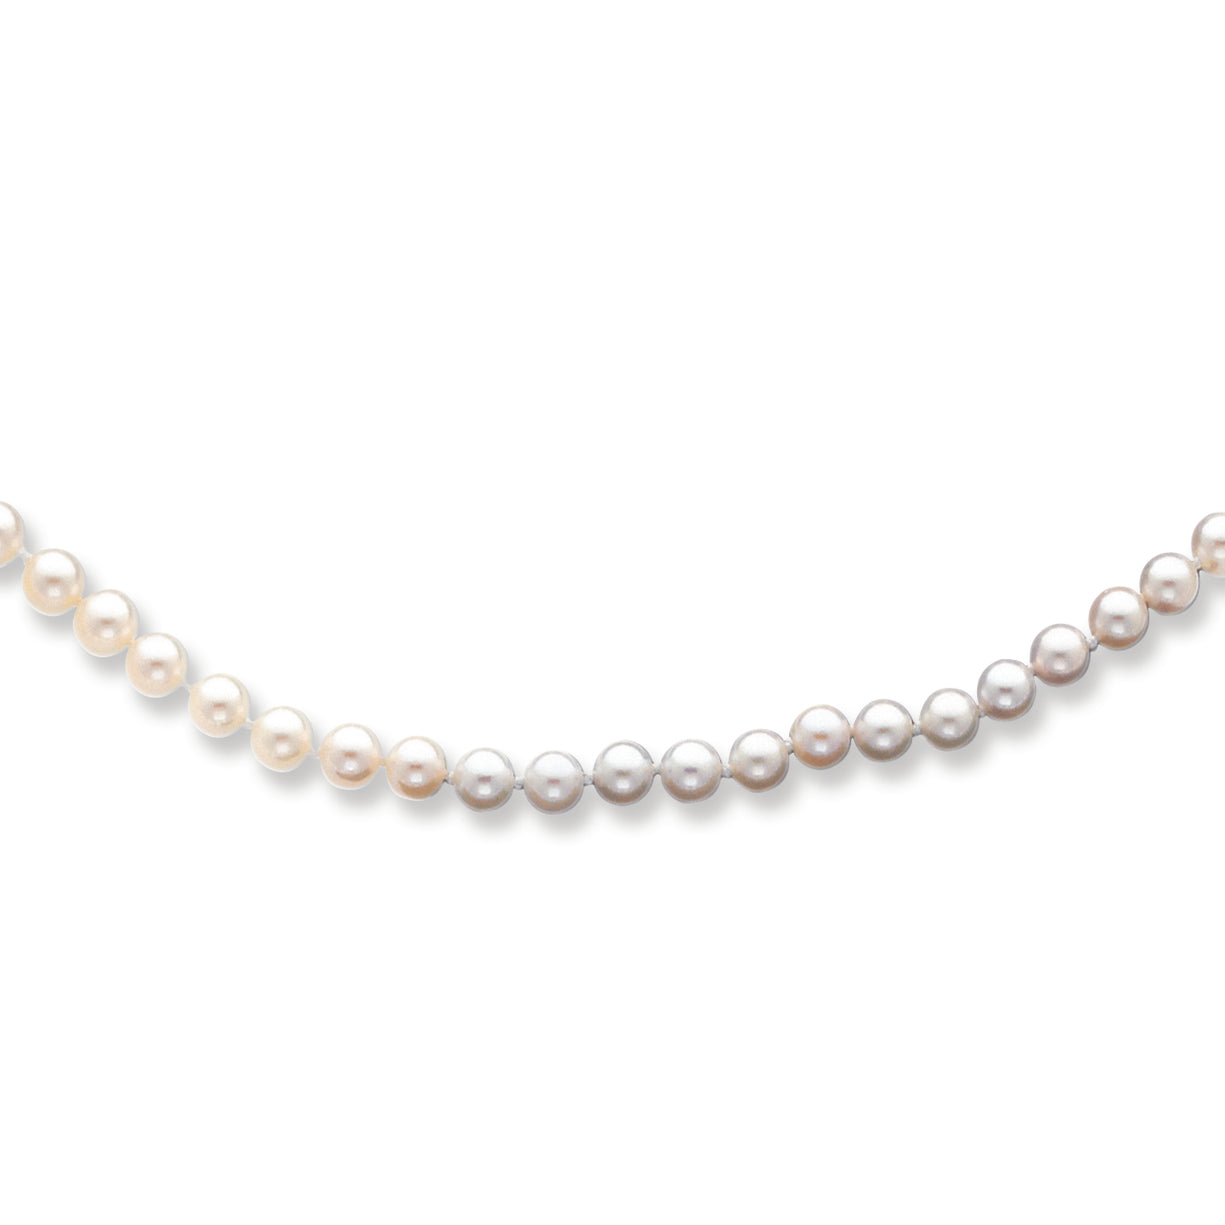 14K Gold 5-5.5mm White Akoya Saltwater Cultured Pearl Necklace 18 Inches